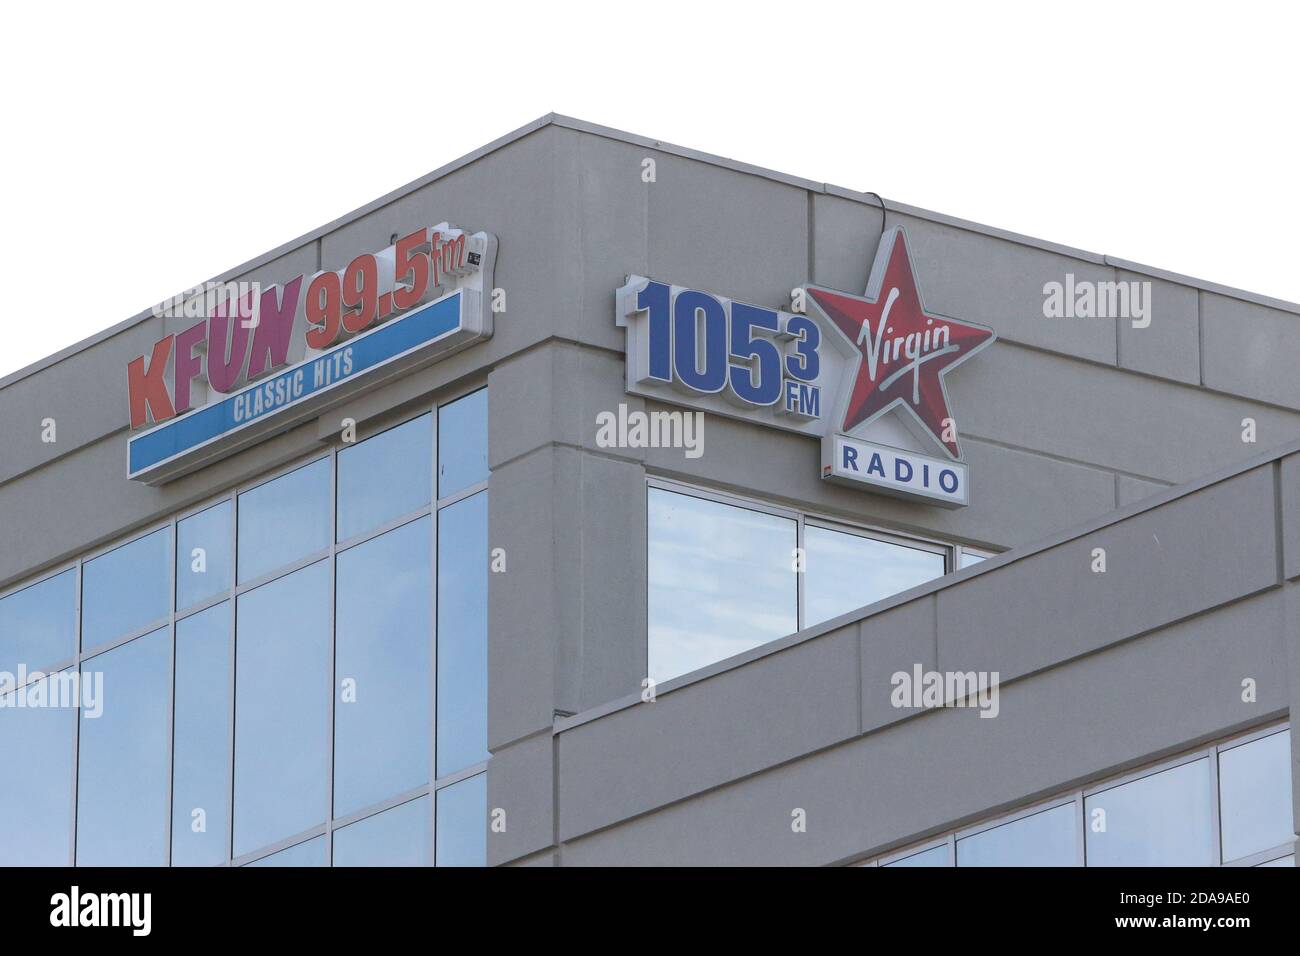 Virgin Radio High Resolution Stock Photography and Images - Alamy